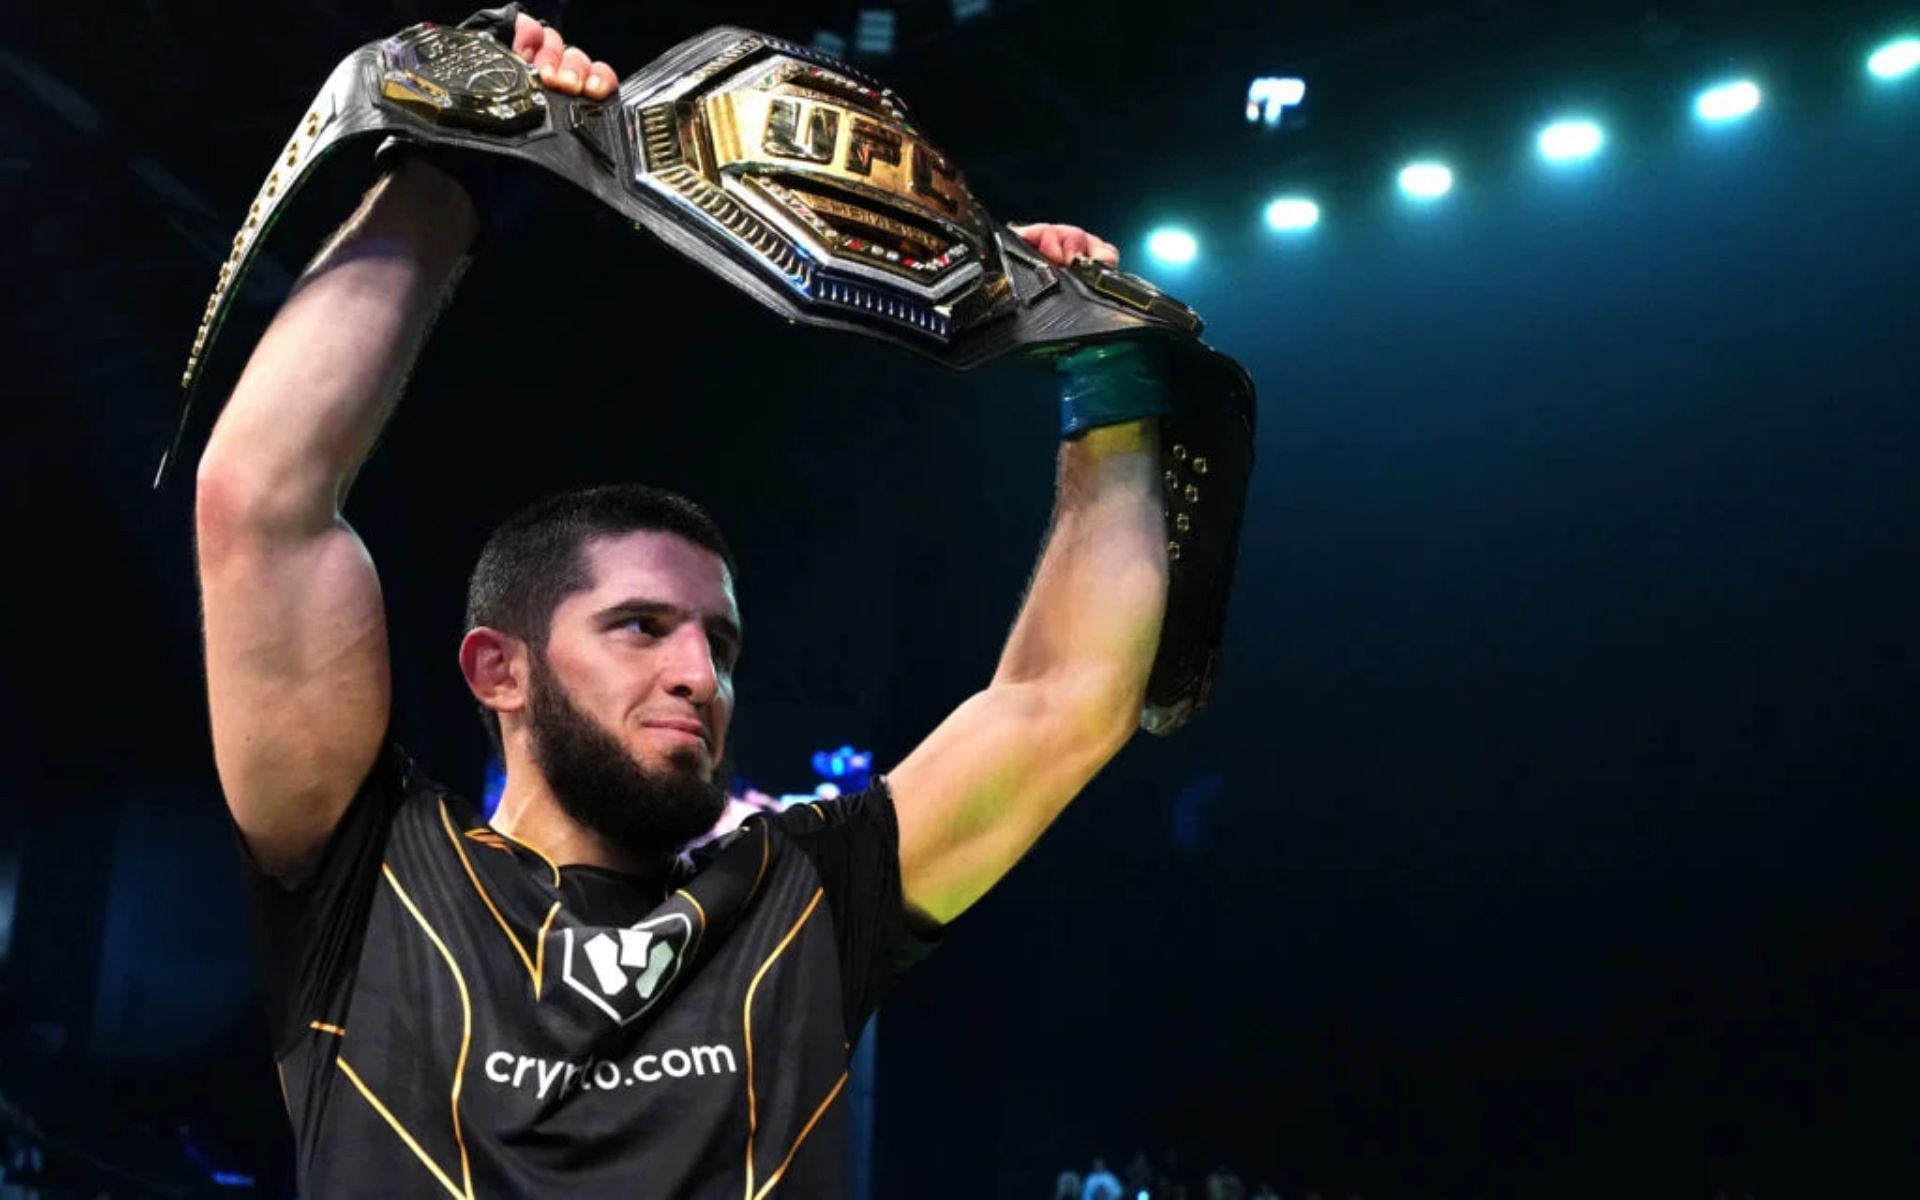 After his big win over Charles Oliveira, Islam Makhachev is now the lightweight champion